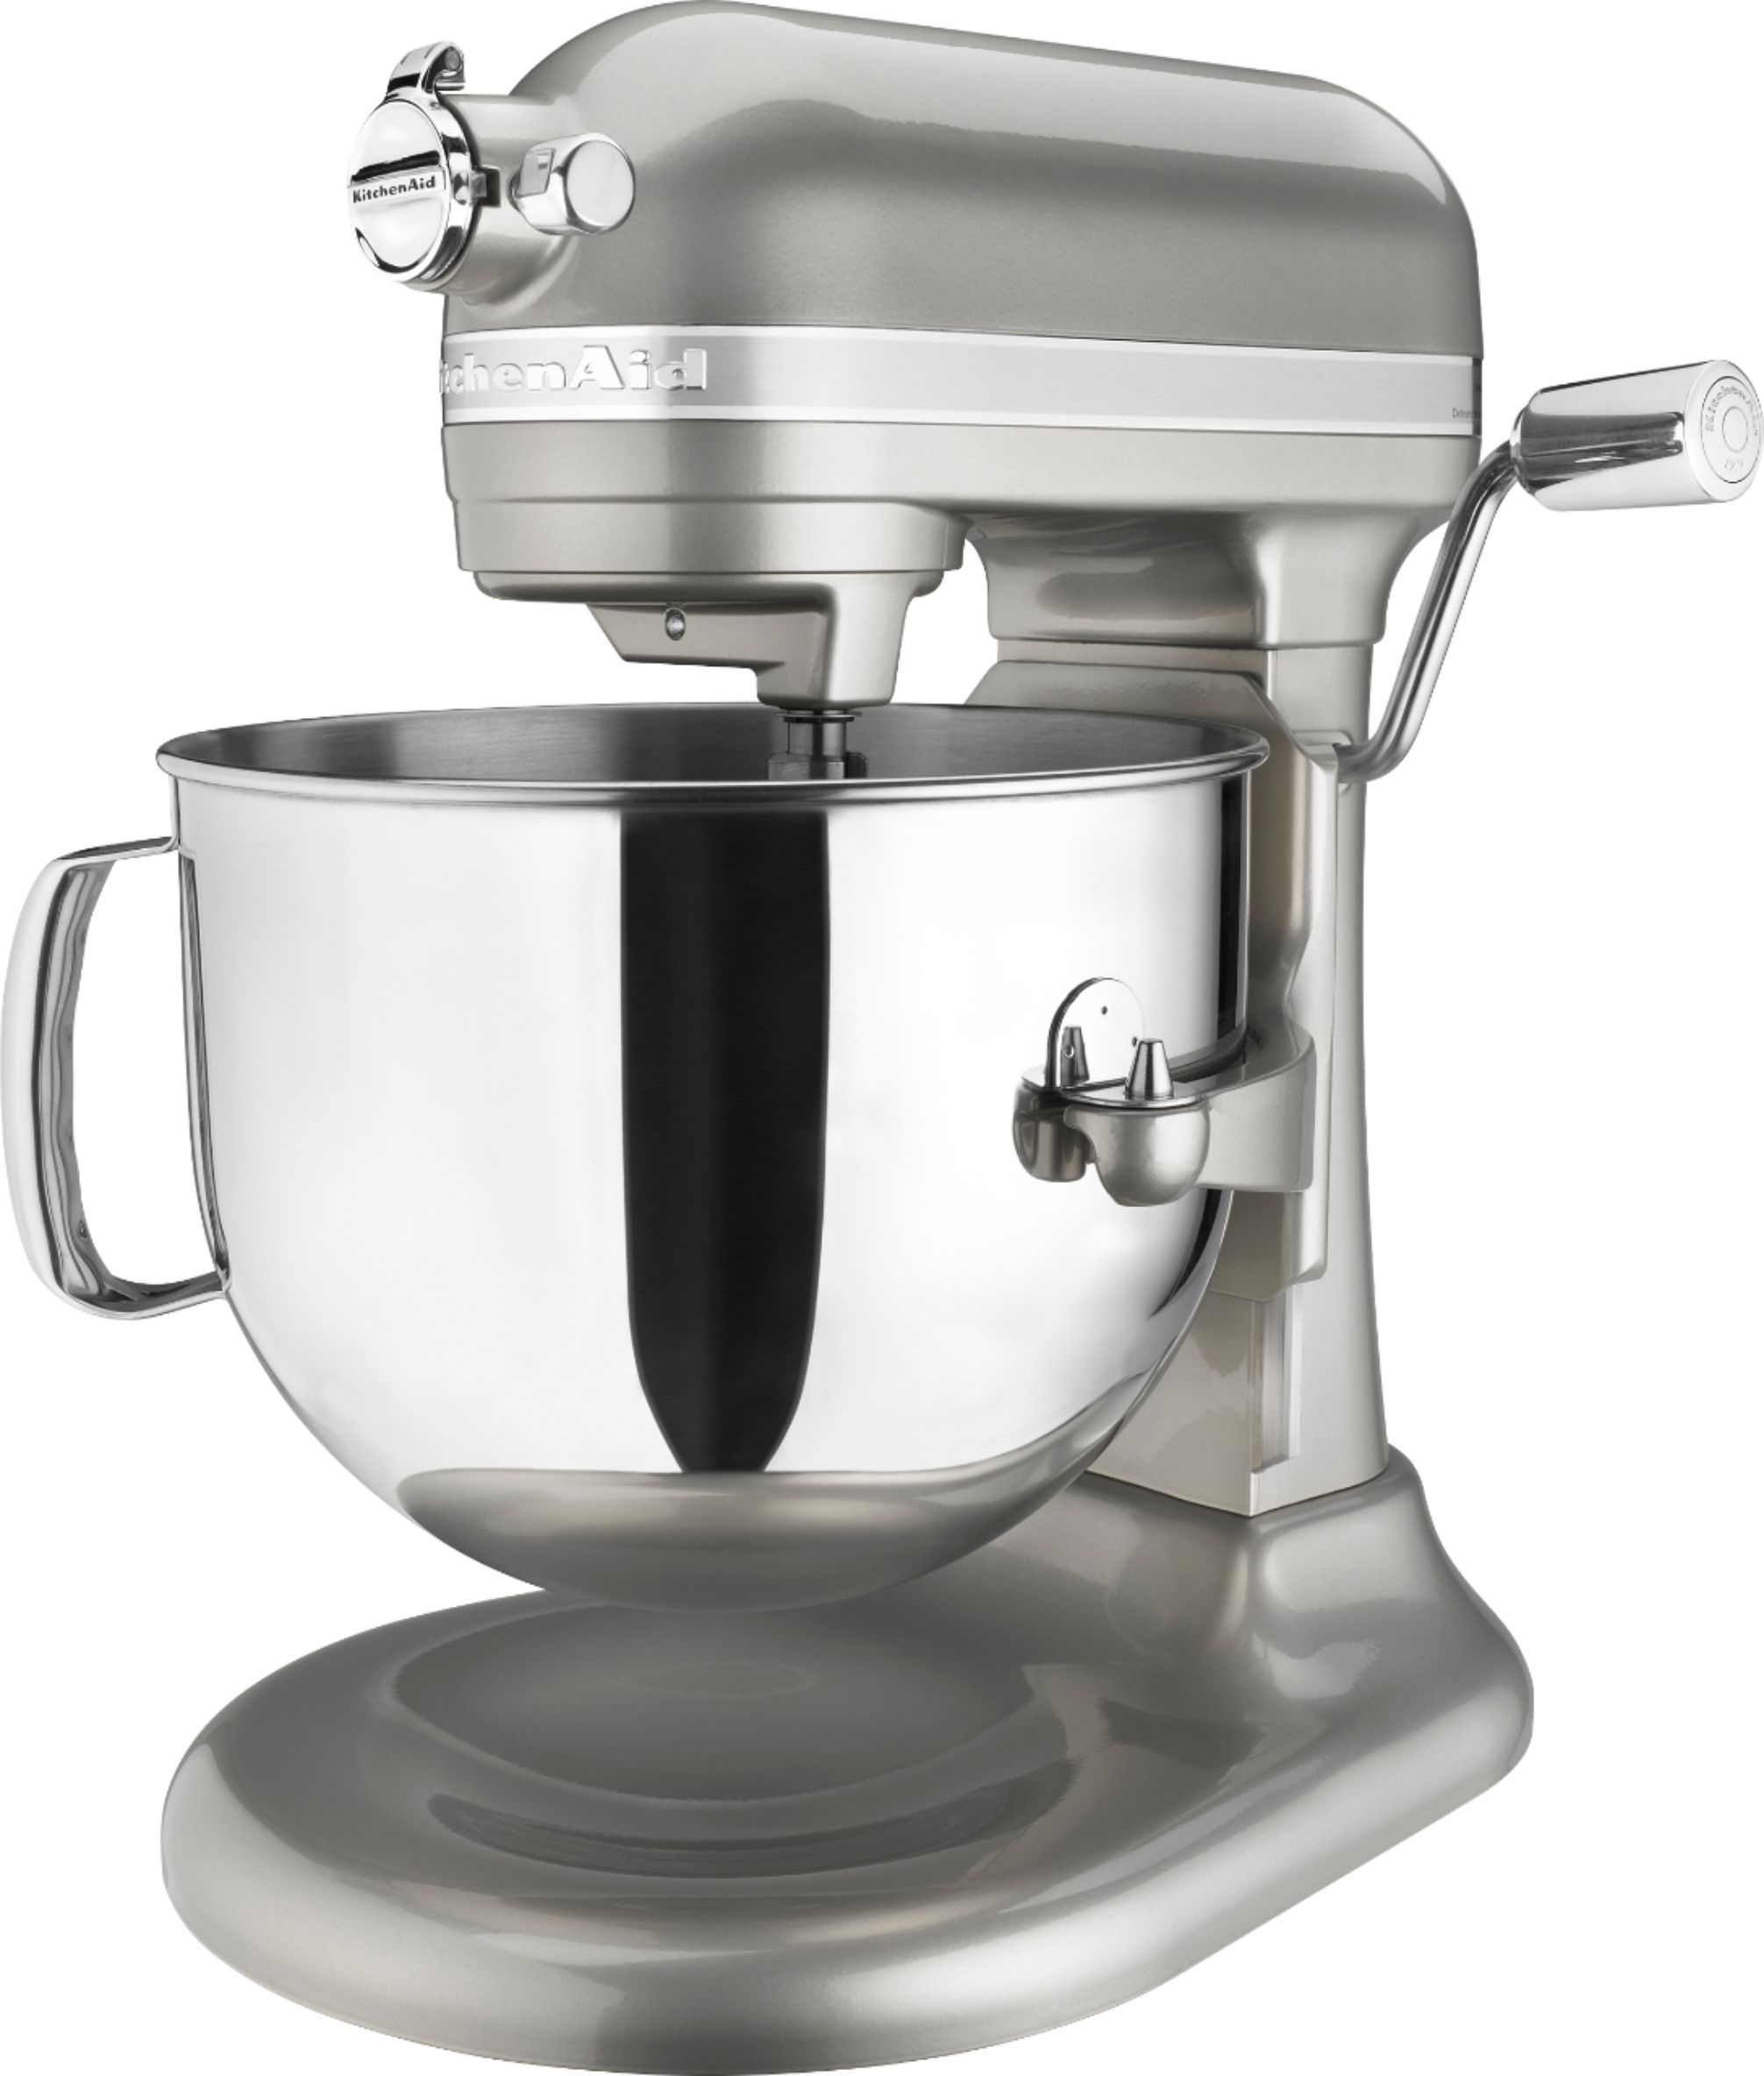 KitchenAid 7-Quart Pro Line Stand Mixer - Frosted Pearl White (with